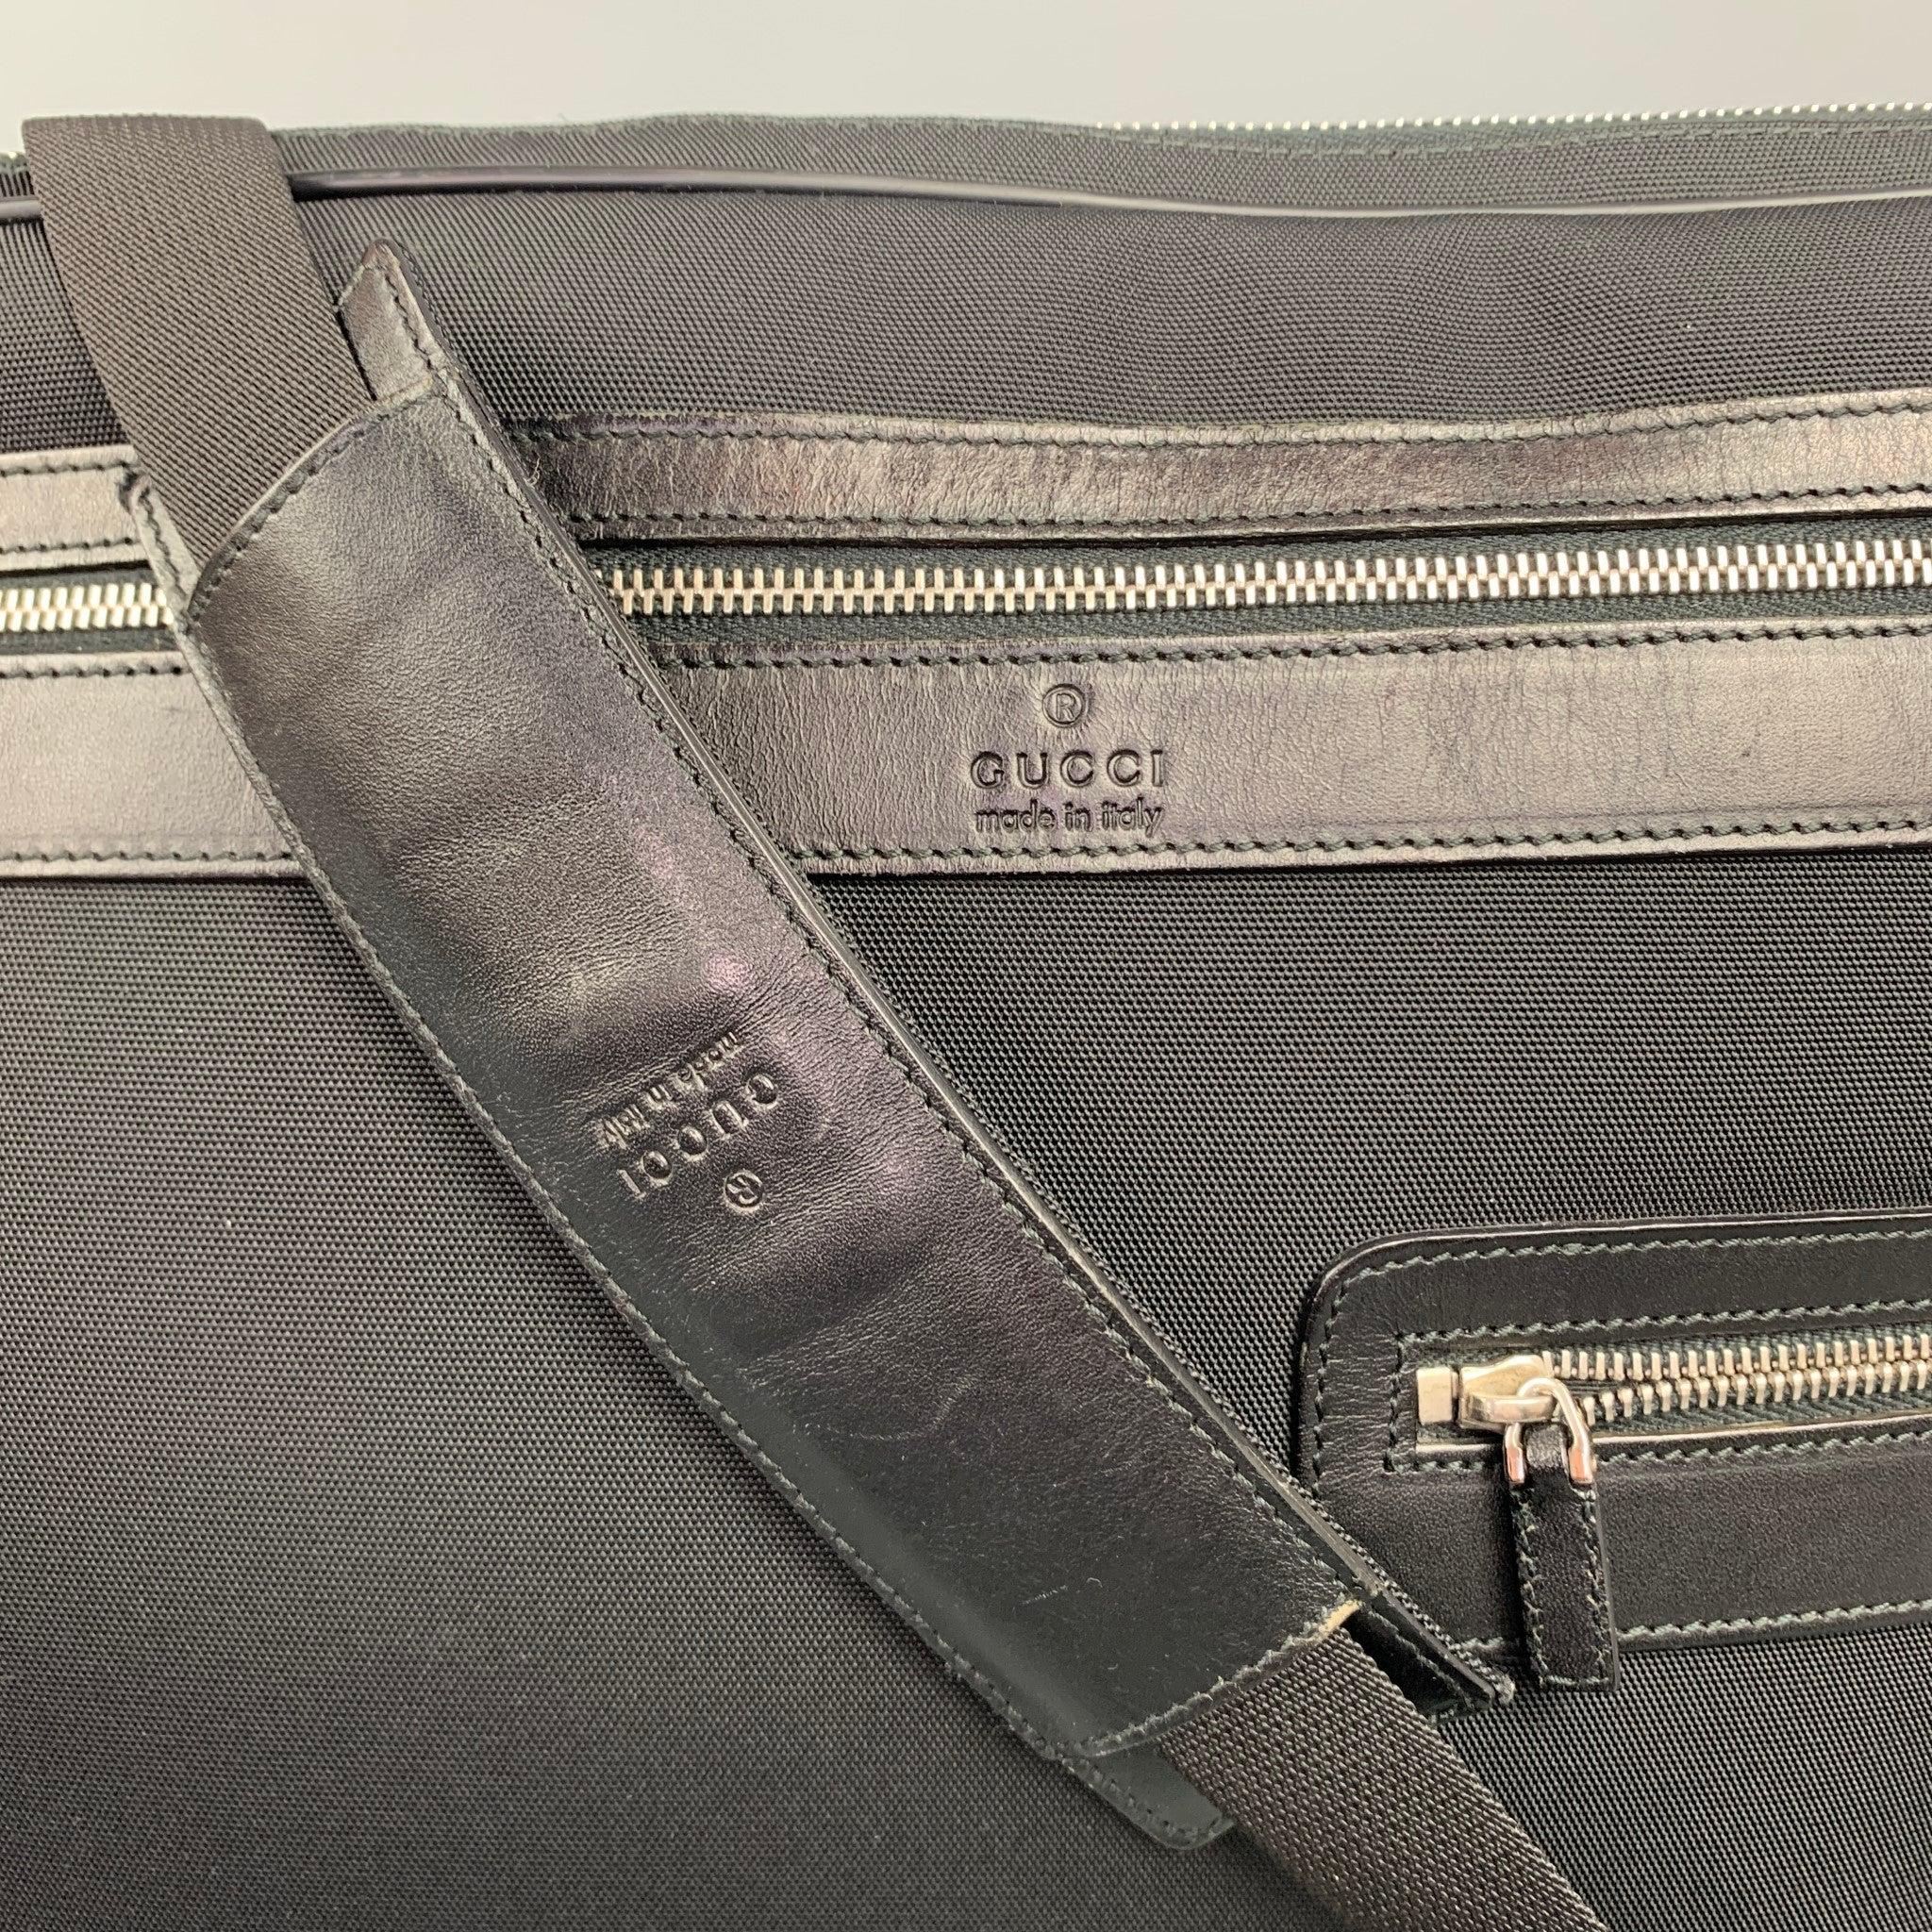 Vintage GUCCI Black Canvas Leather Trim Messenger Bag In Good Condition For Sale In San Francisco, CA